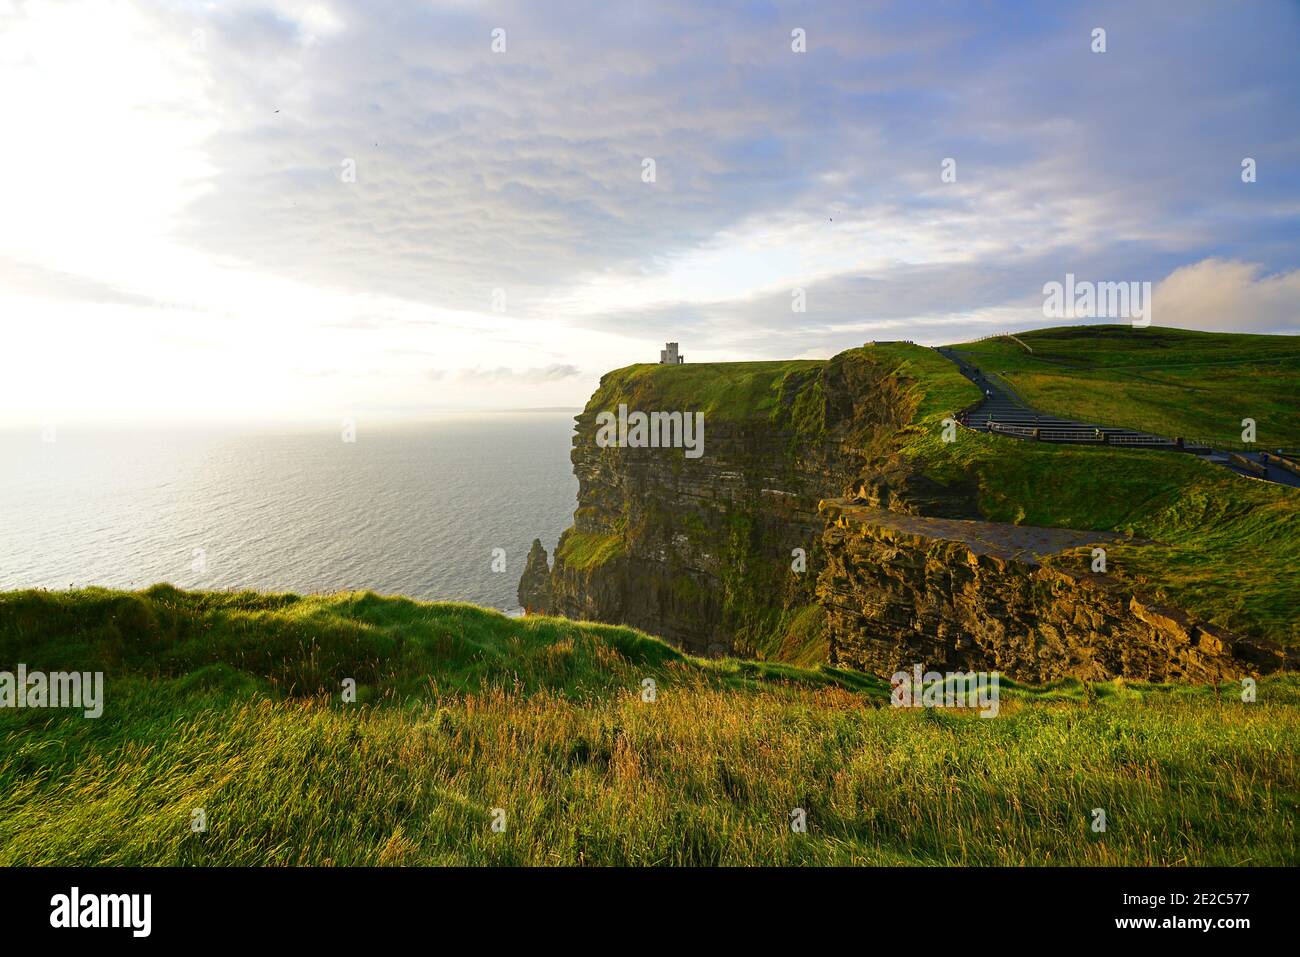 The Cliffs of Moher in Ireland. Stock Photo